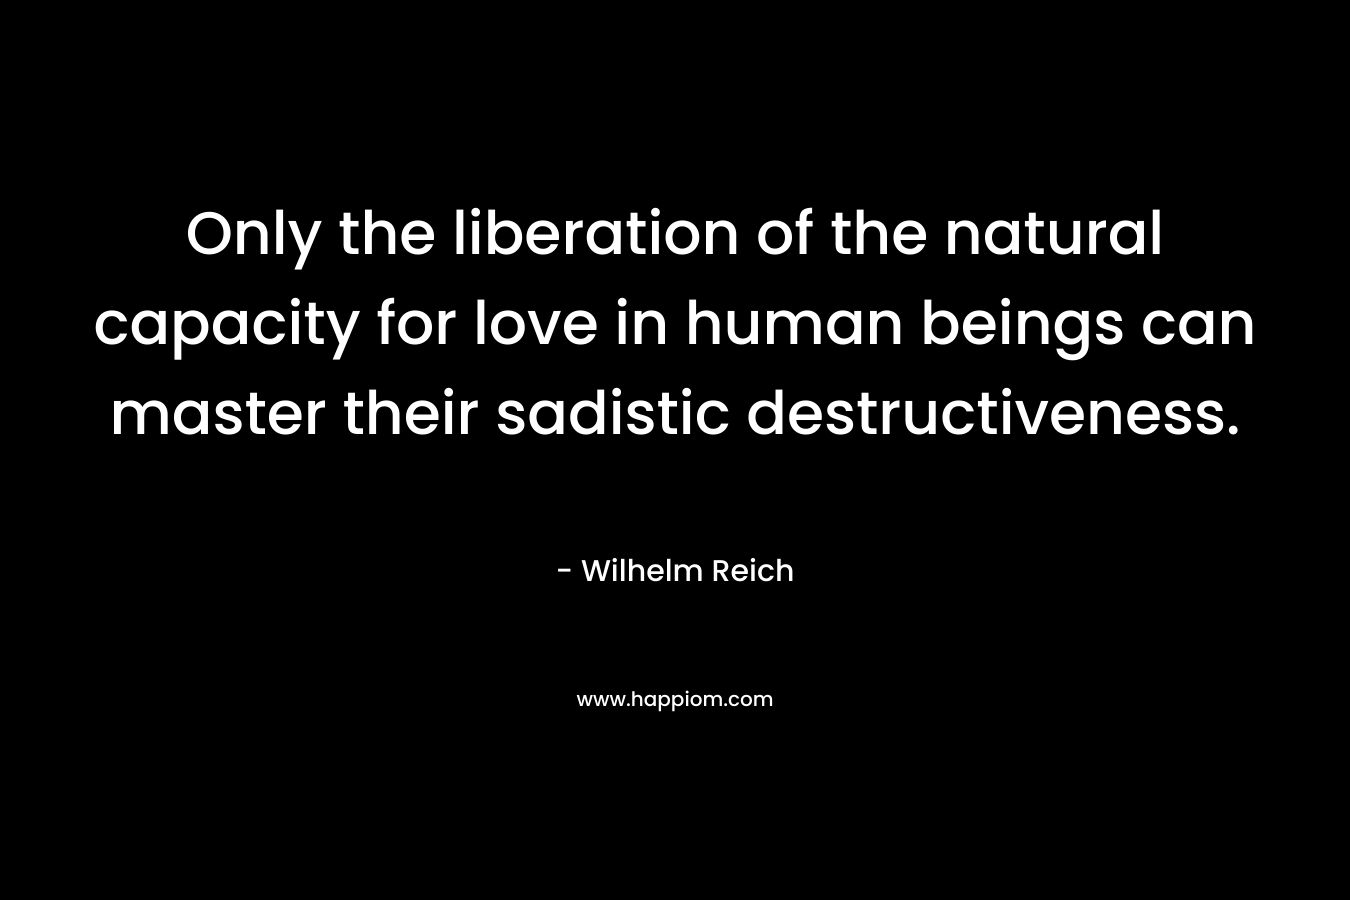 Only the liberation of the natural capacity for love in human beings can master their sadistic destructiveness. – Wilhelm Reich